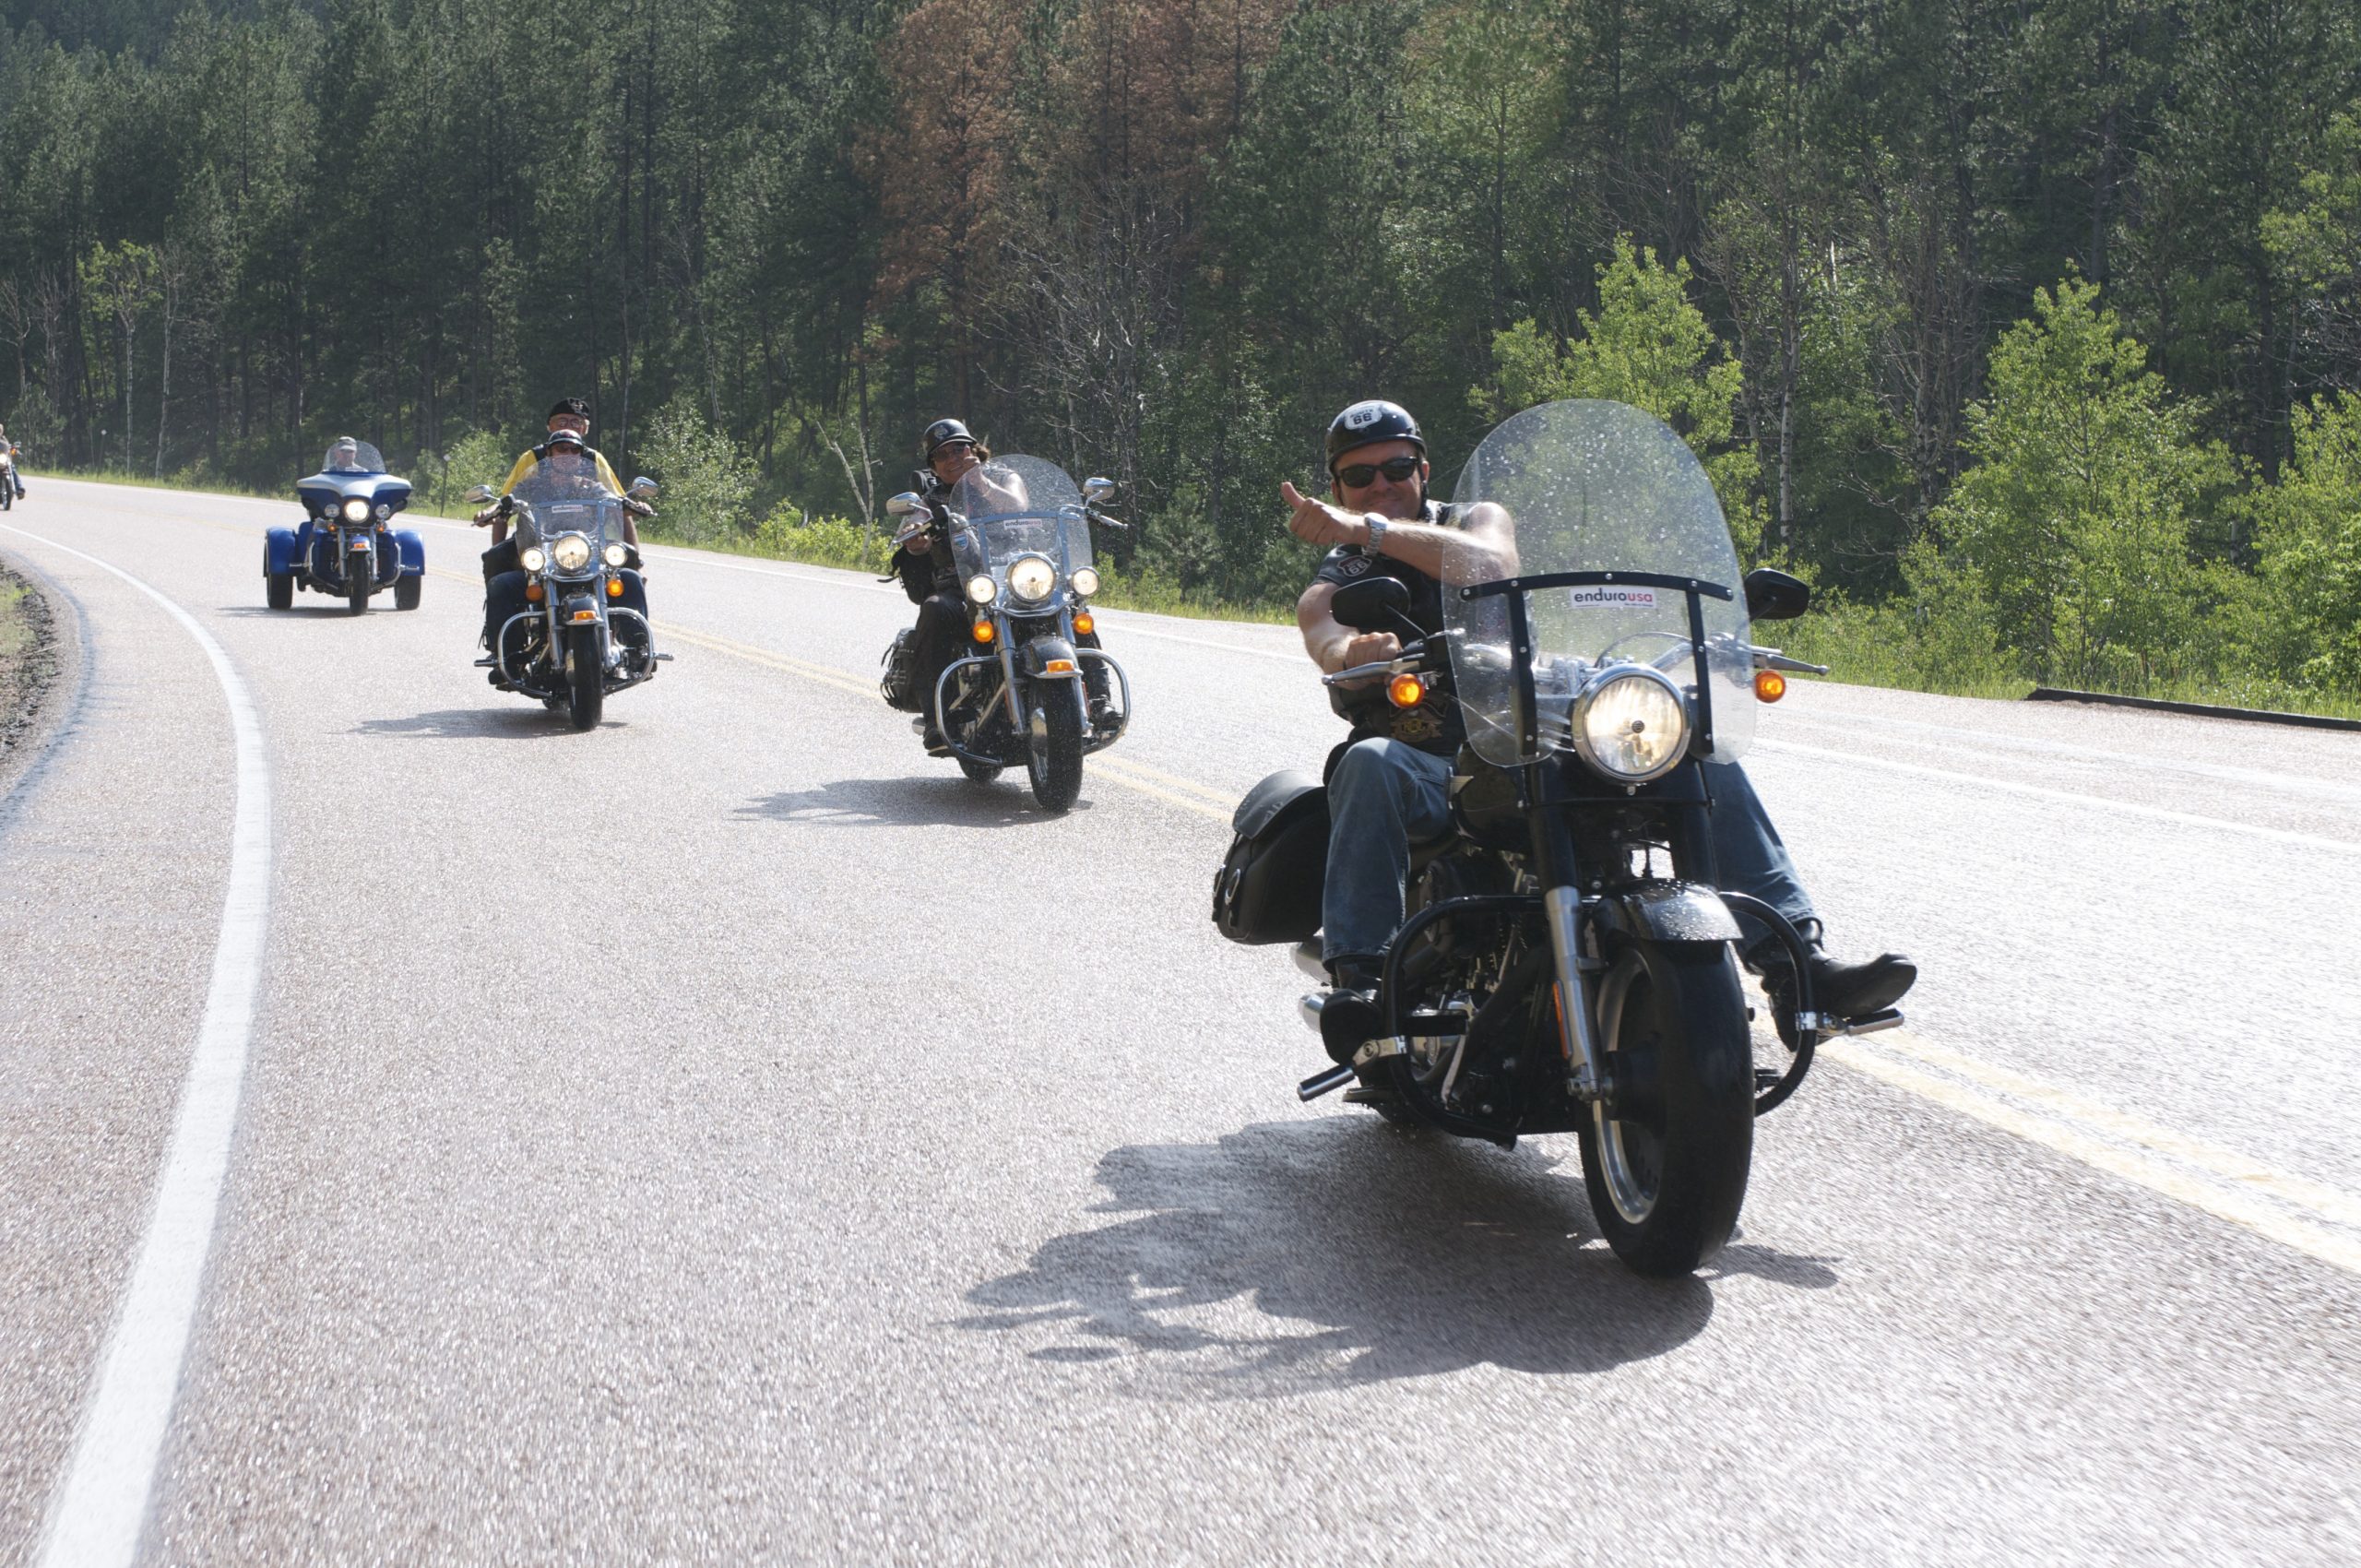 The Complete Sturgis Rally Guide: Everything You Need To Know About The Sturgis Motorcycle Rally